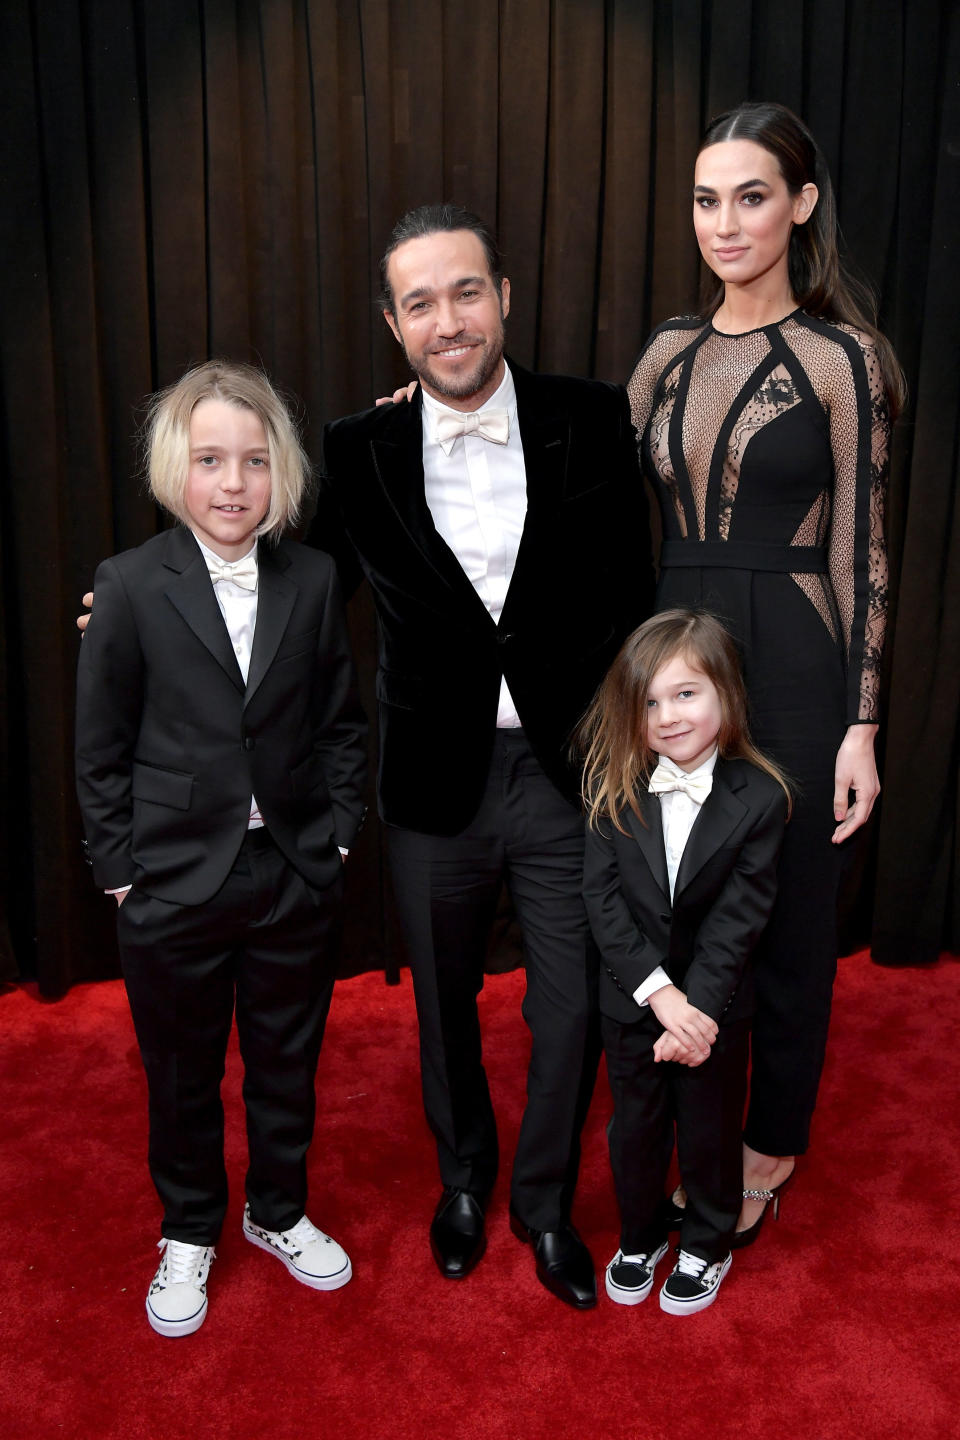 Pete Wentz with sons Bronx Mowgli, 10, and Saint Lazslo, 4, as well as partner Meagan Camper.